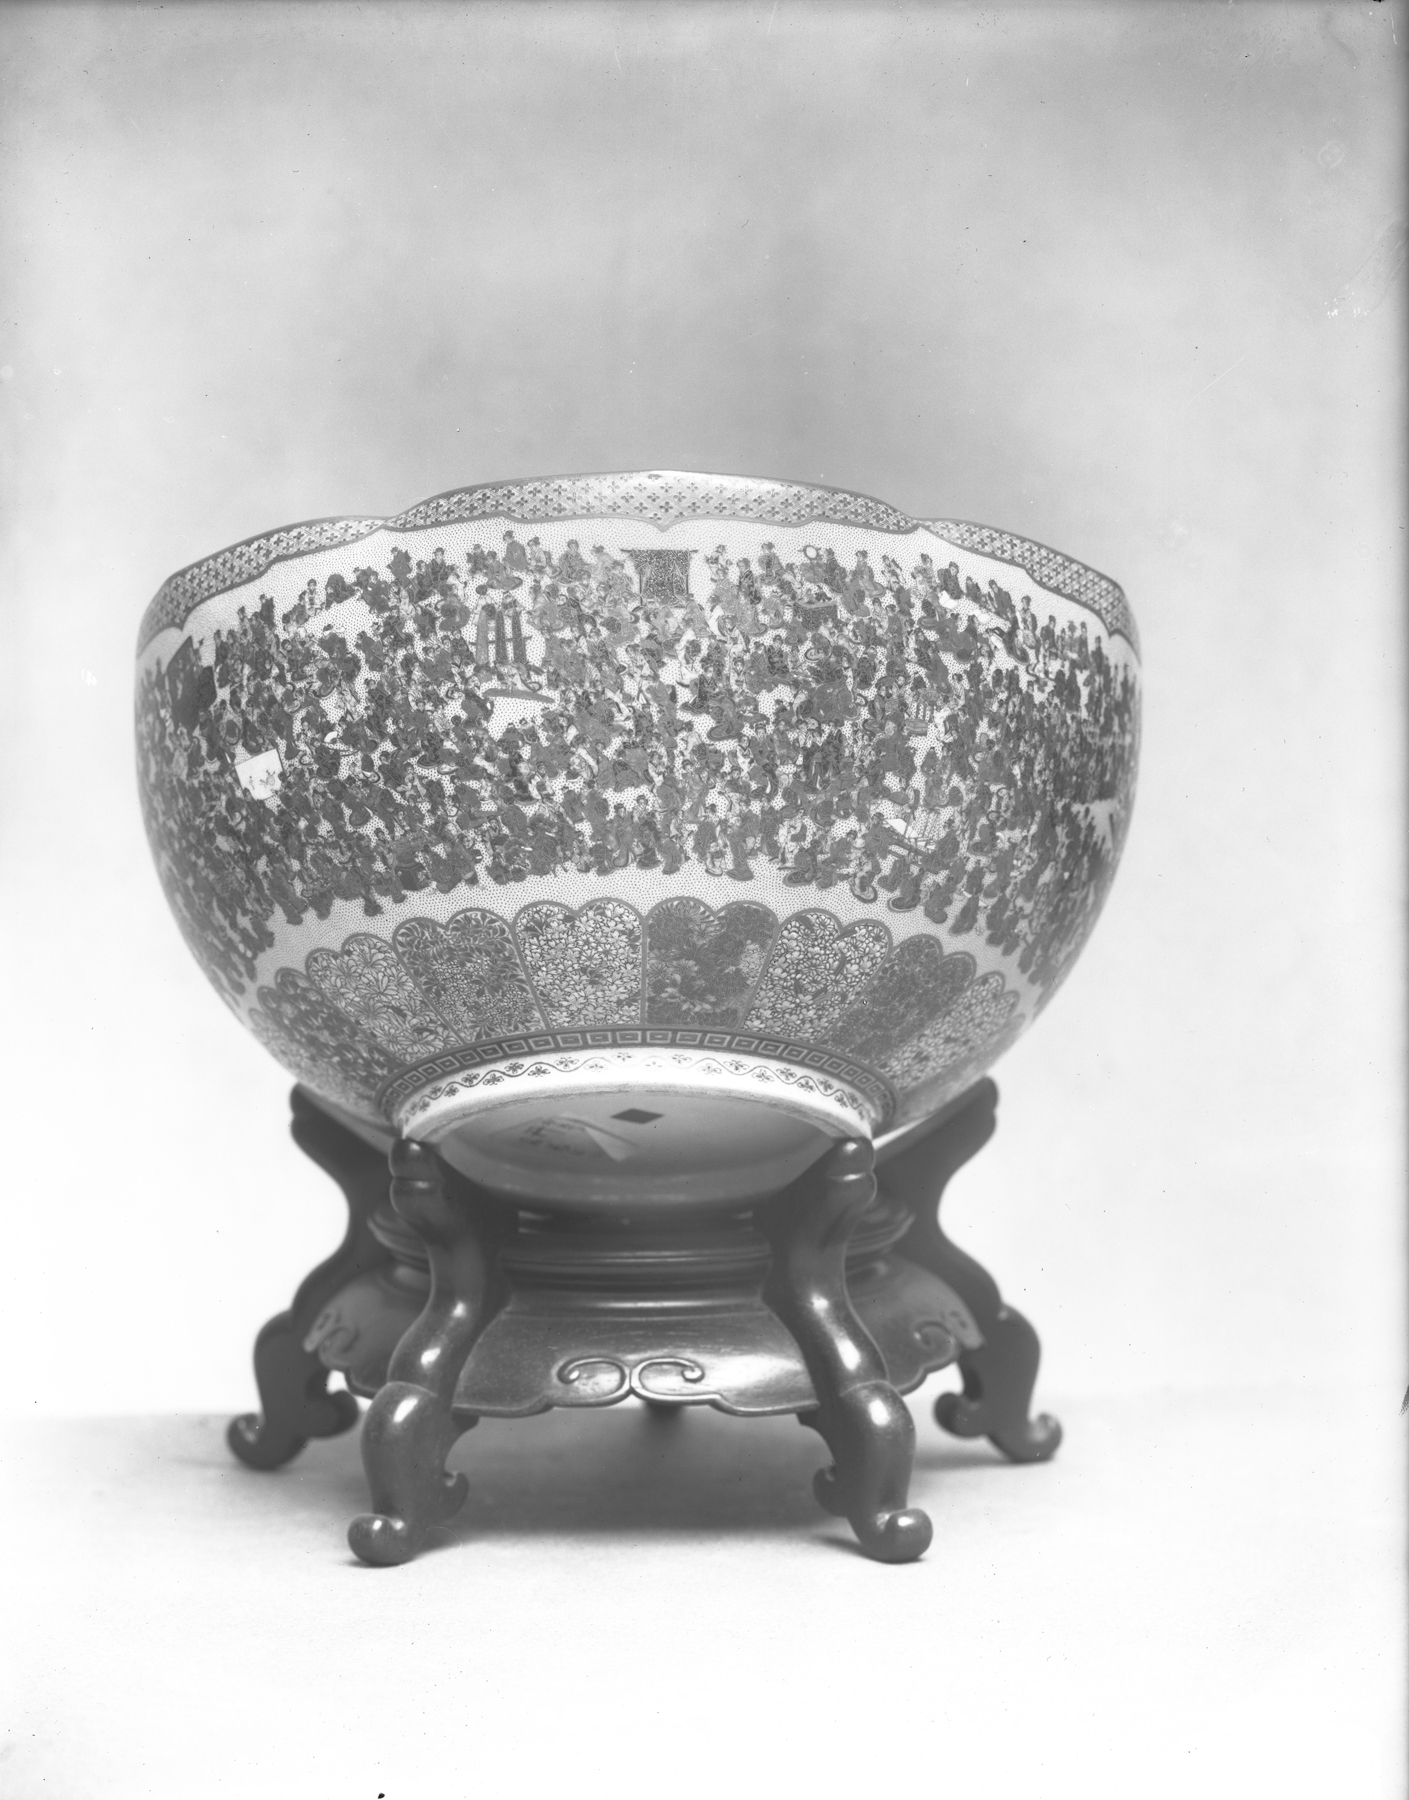 Image for Bowl with a Multitude of Women